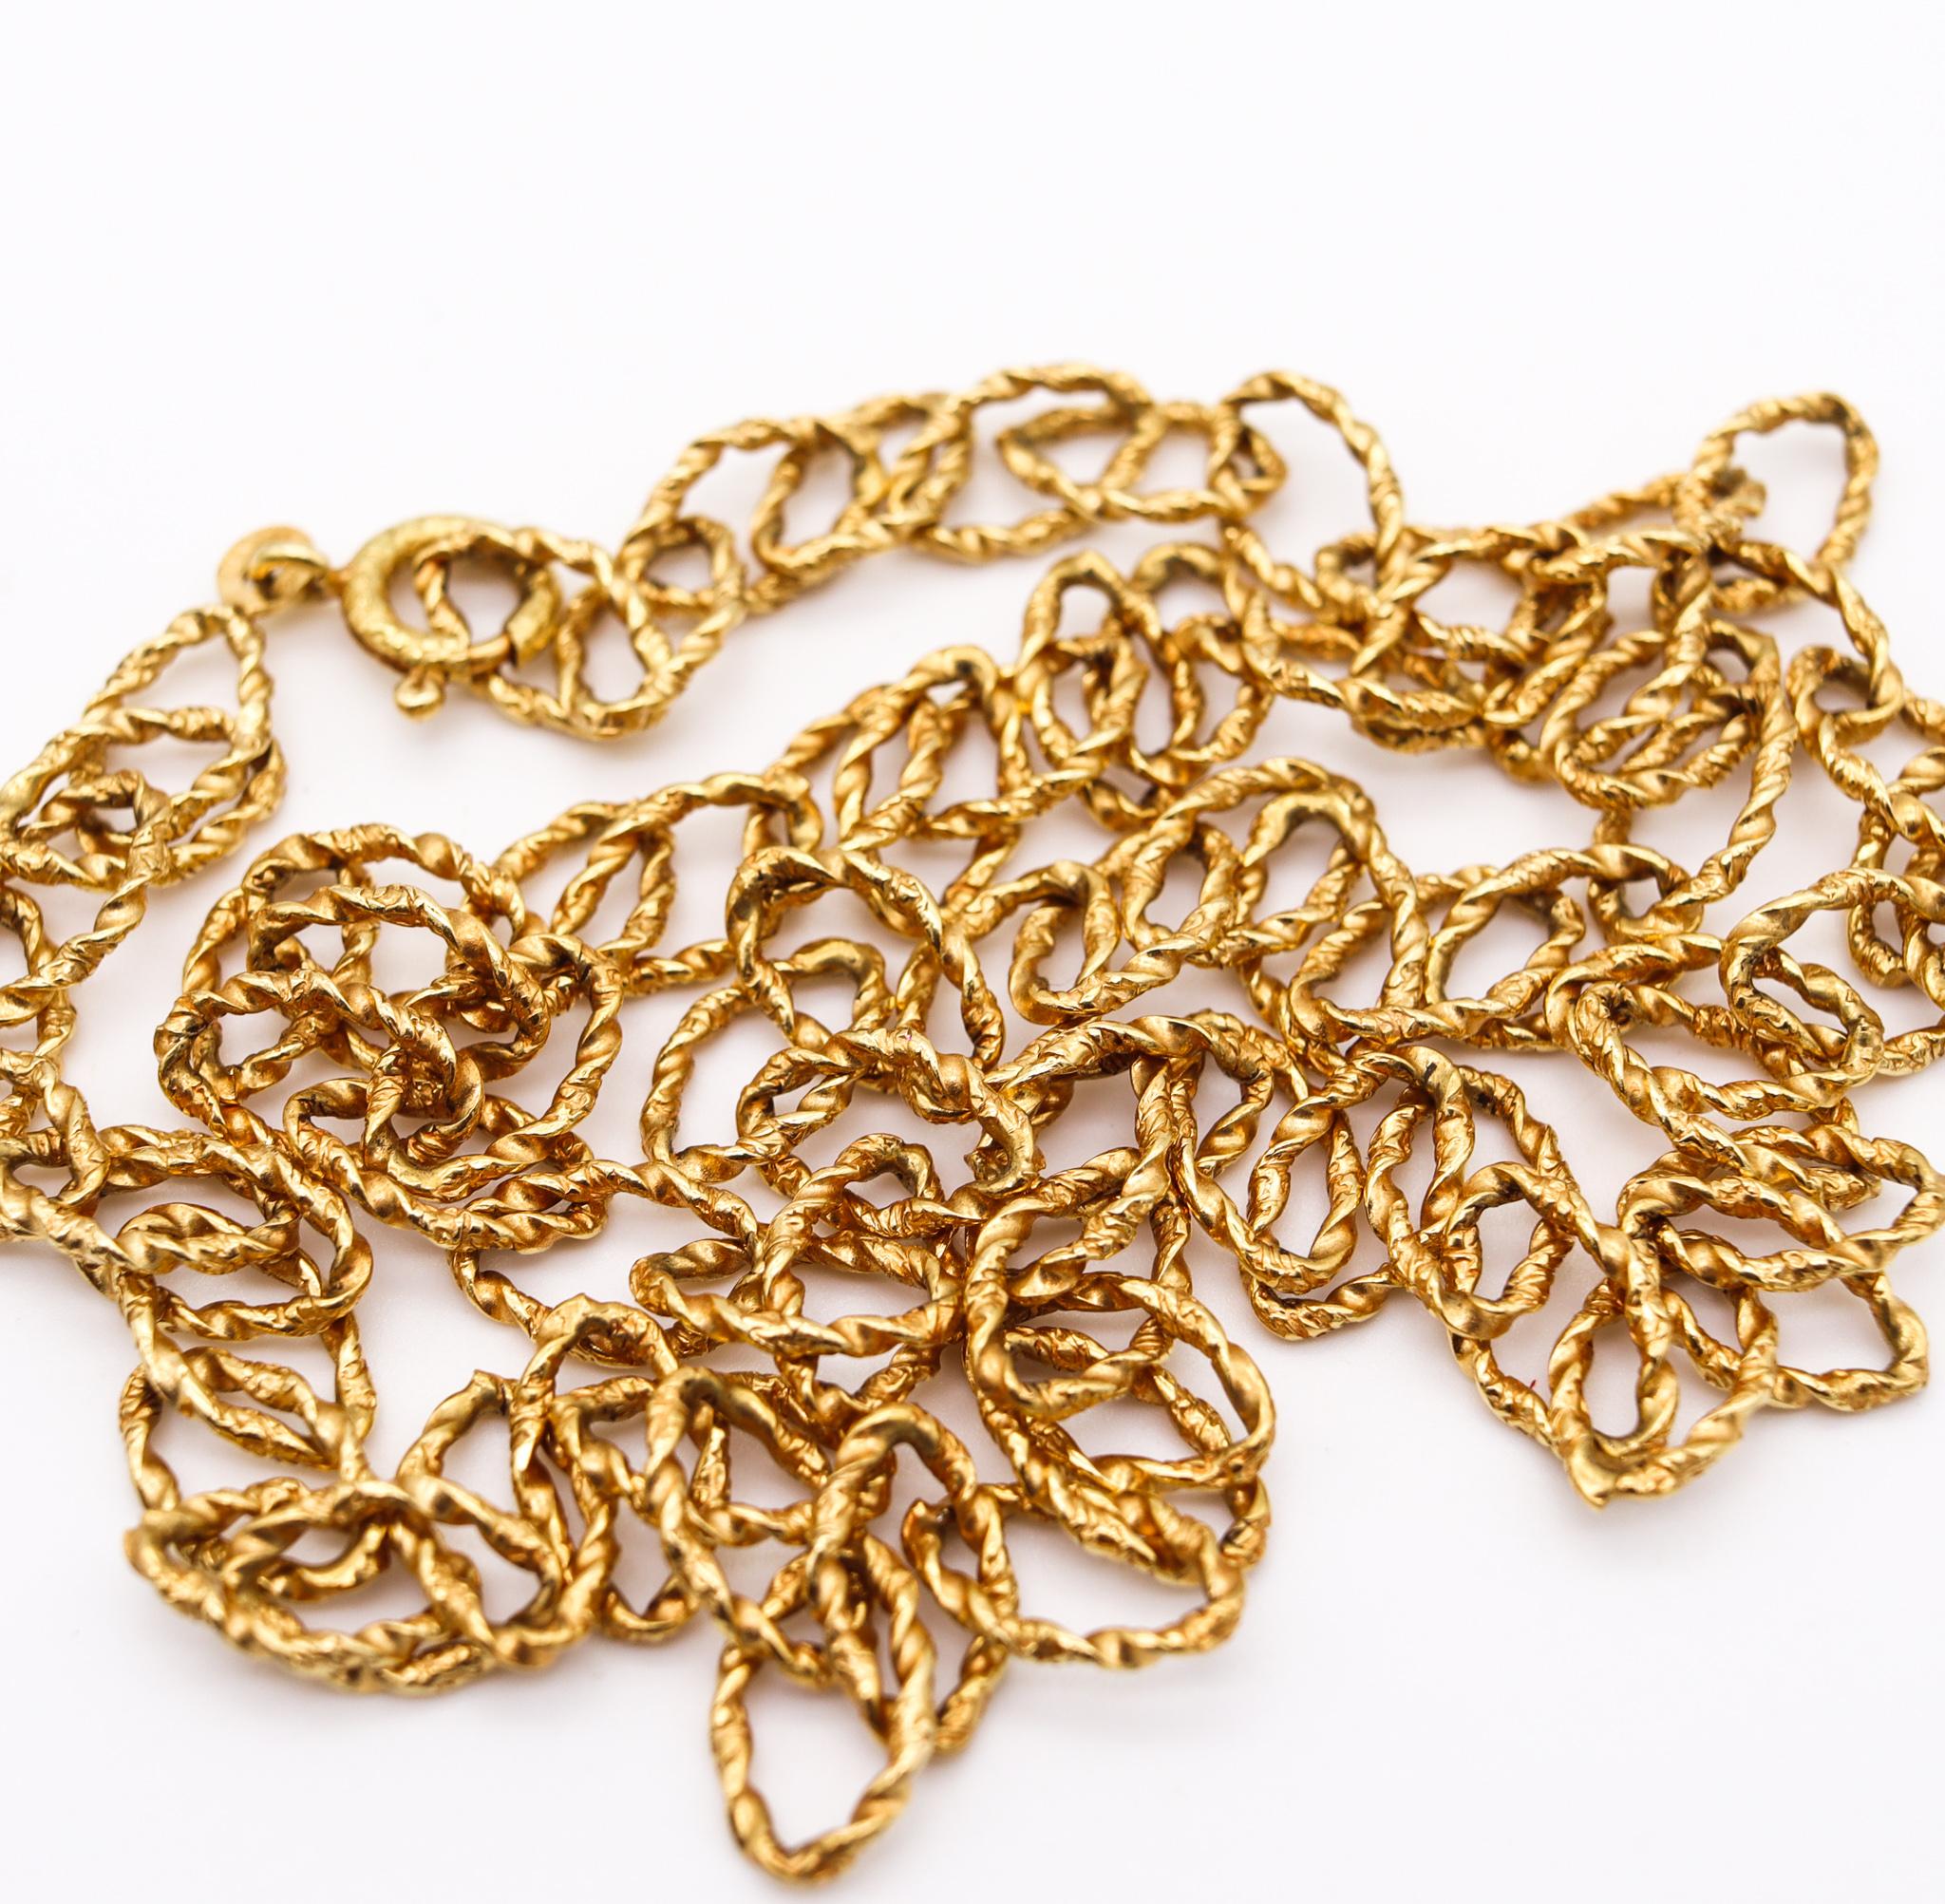 Women's or Men's Italian Retro 1970 Modernist Long Chain with Textured Links in 18Kt Yellow Gold